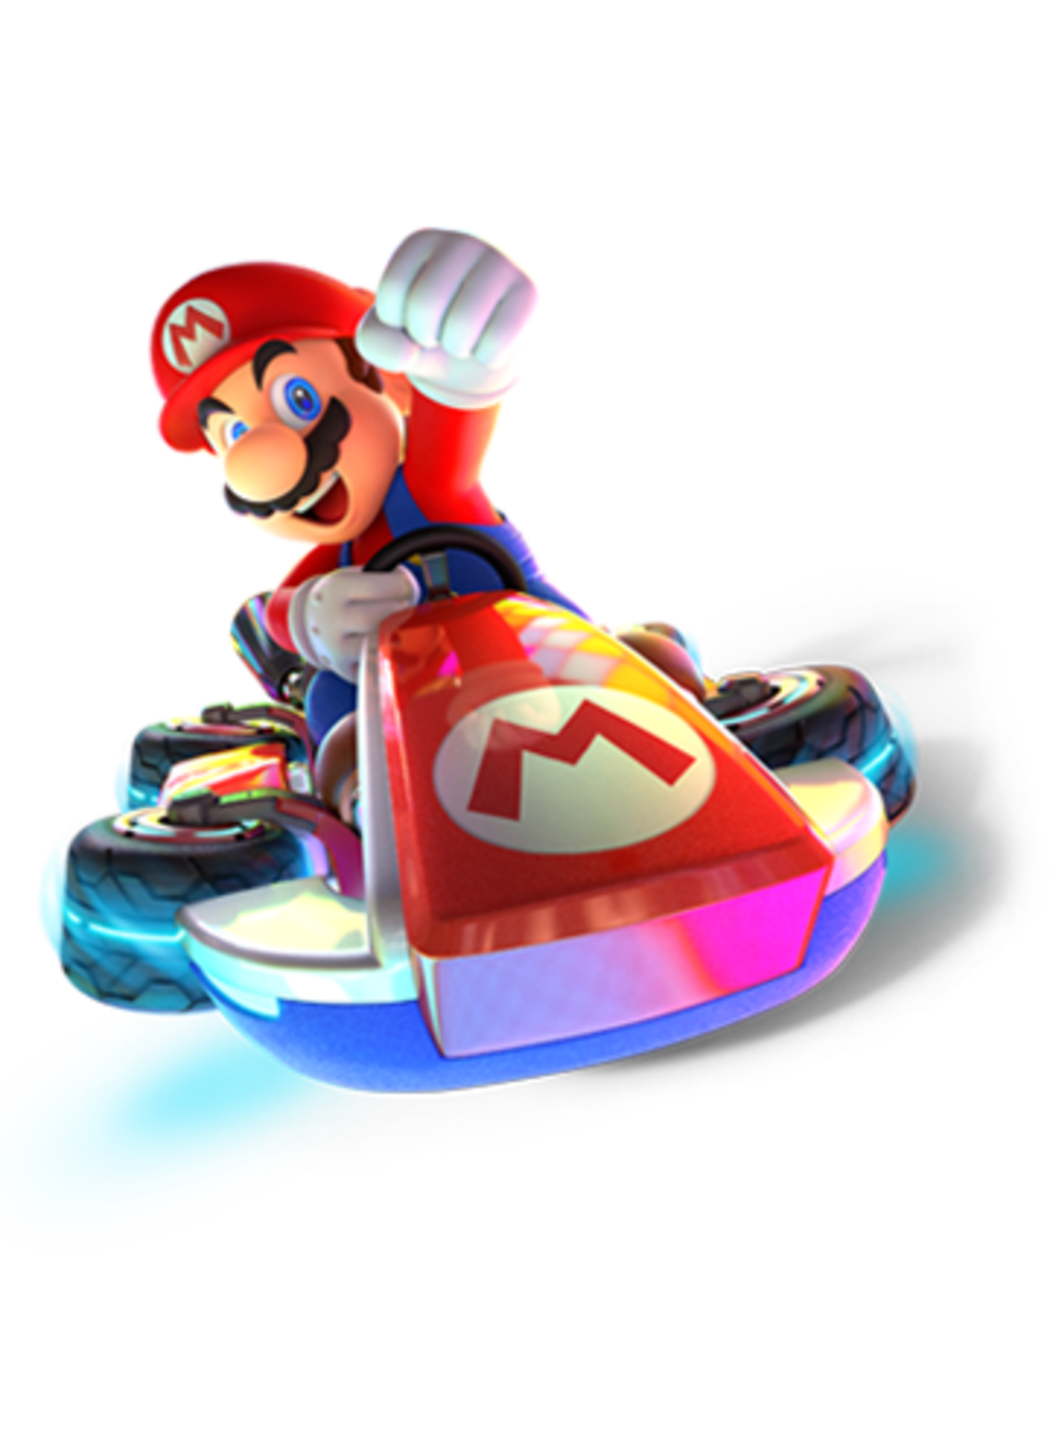 Mario Kart 8 Deluxe Booster Course Pass For Nintendo Switch Nintendo Official Site